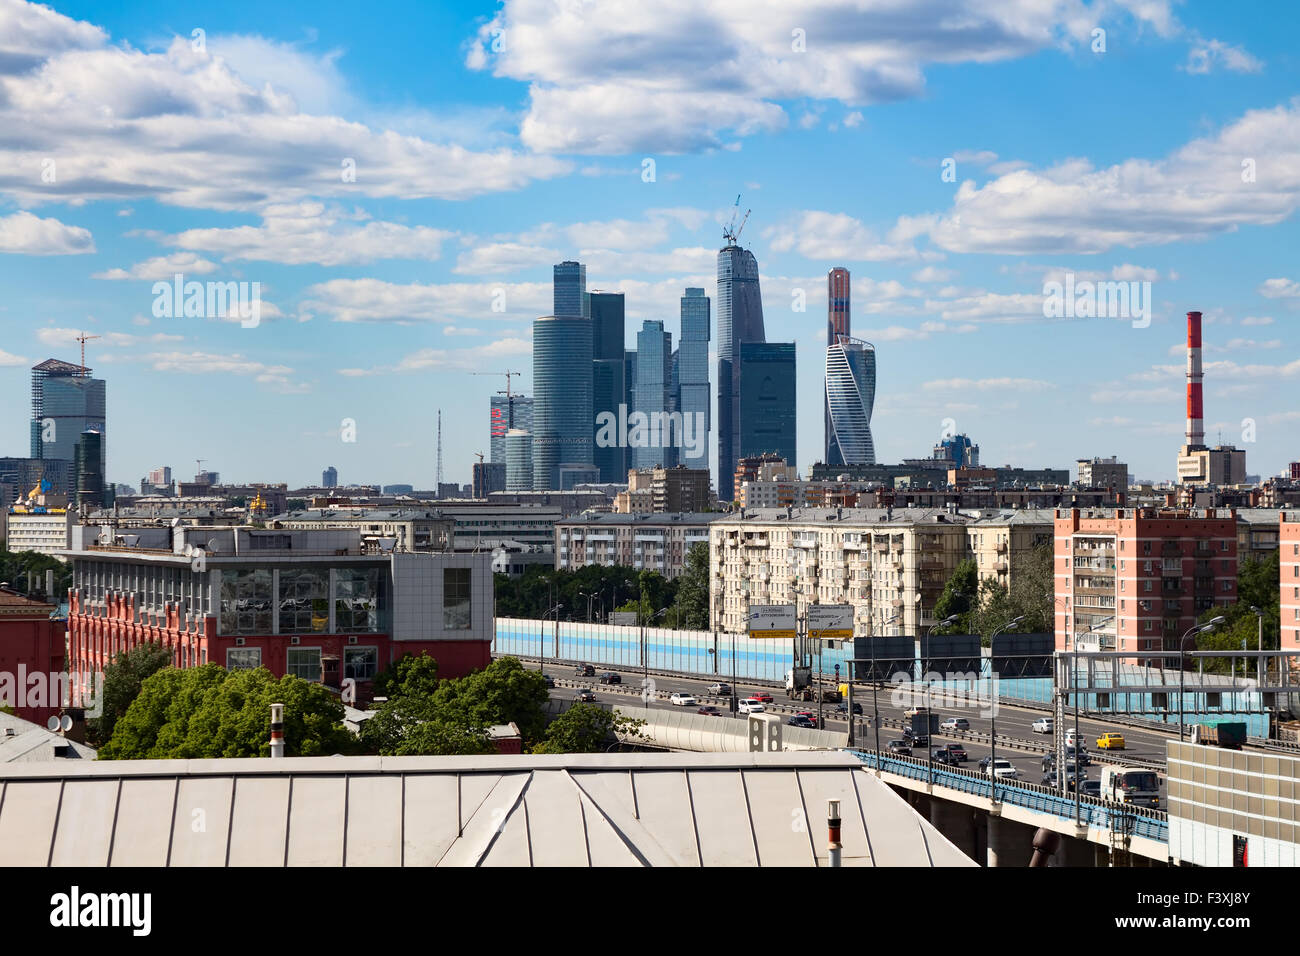 06/12/2015. Russia Moscow. View of Moscow city from the Russian Academy of Sciences. Stock Photo